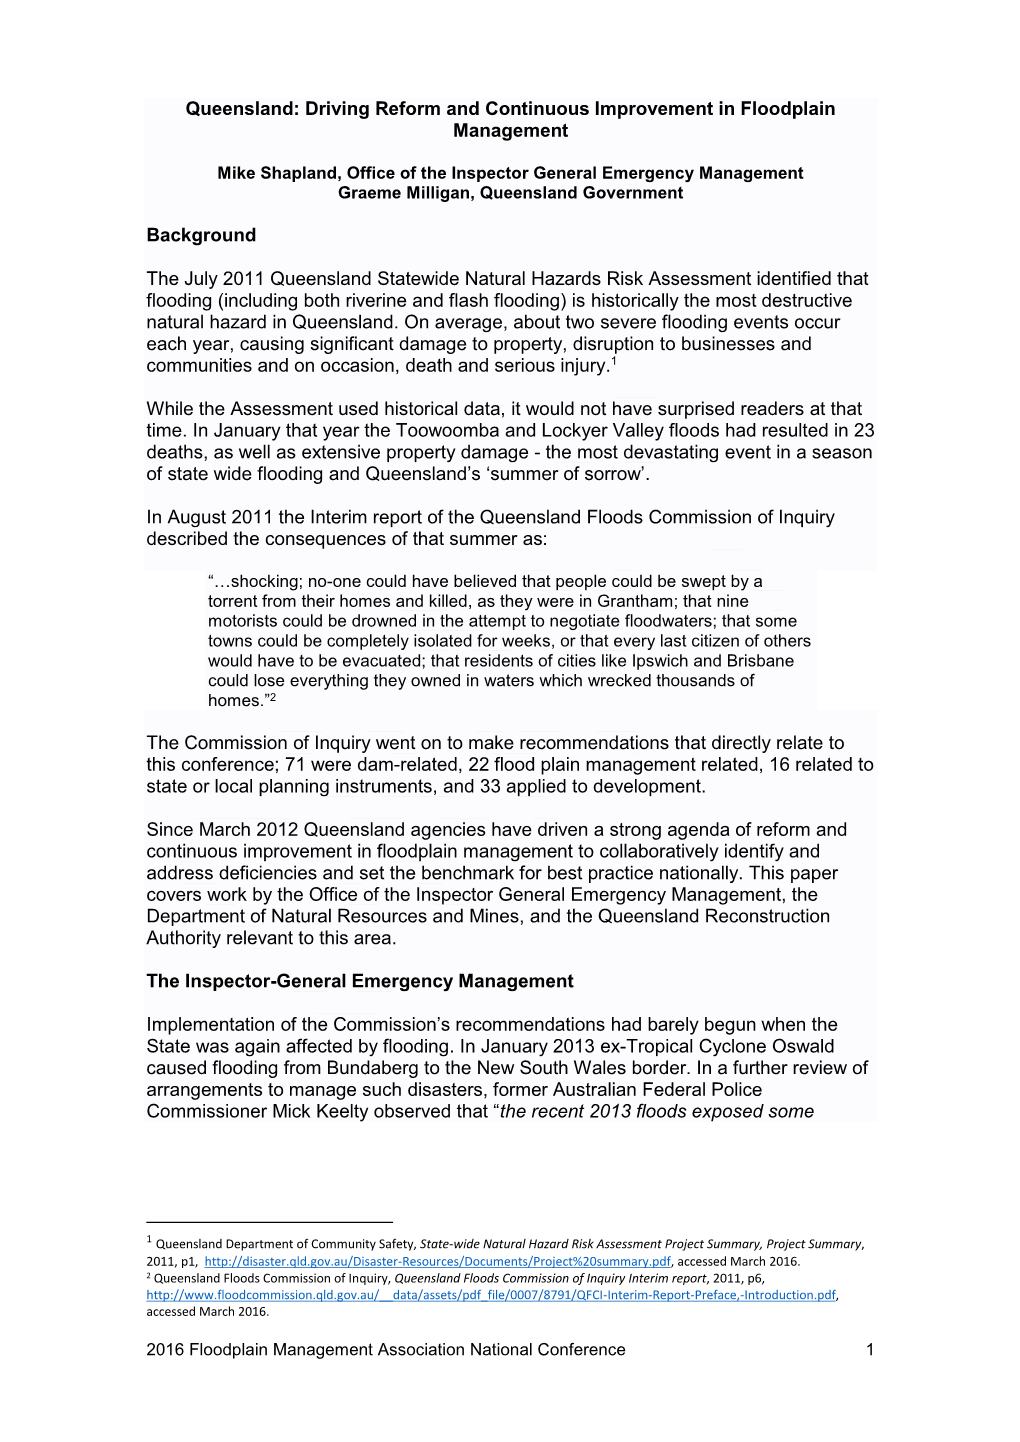 Queensland: Driving Reform and Continuous Improvement in Floodplain Management Background the July 2011 Queensland Statewide